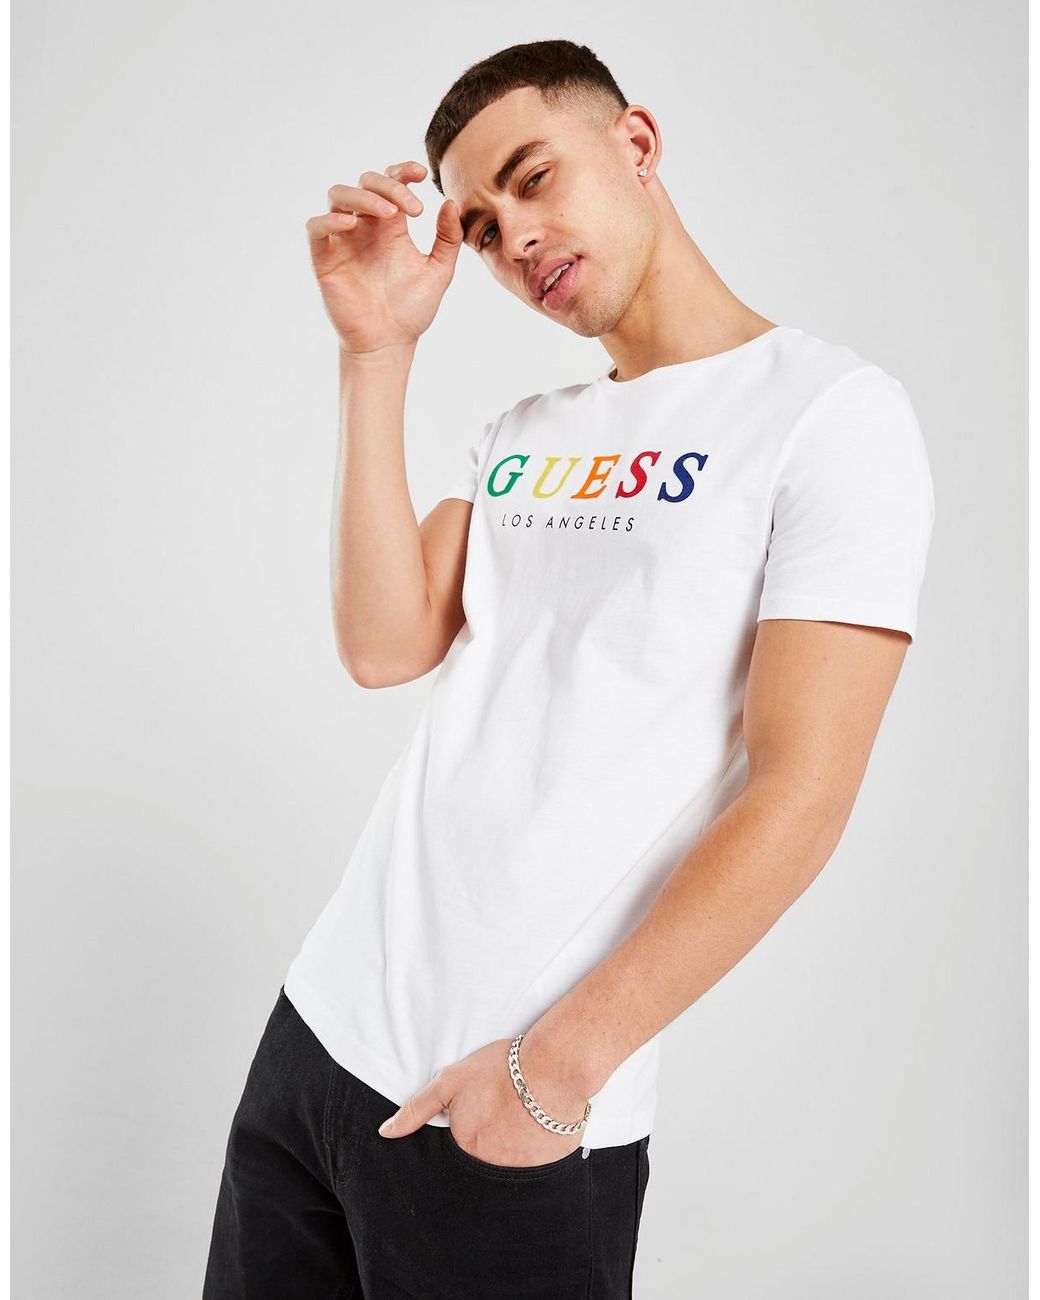 Guess Cotton Rainbow Logo T-shirt in White for Men - Lyst